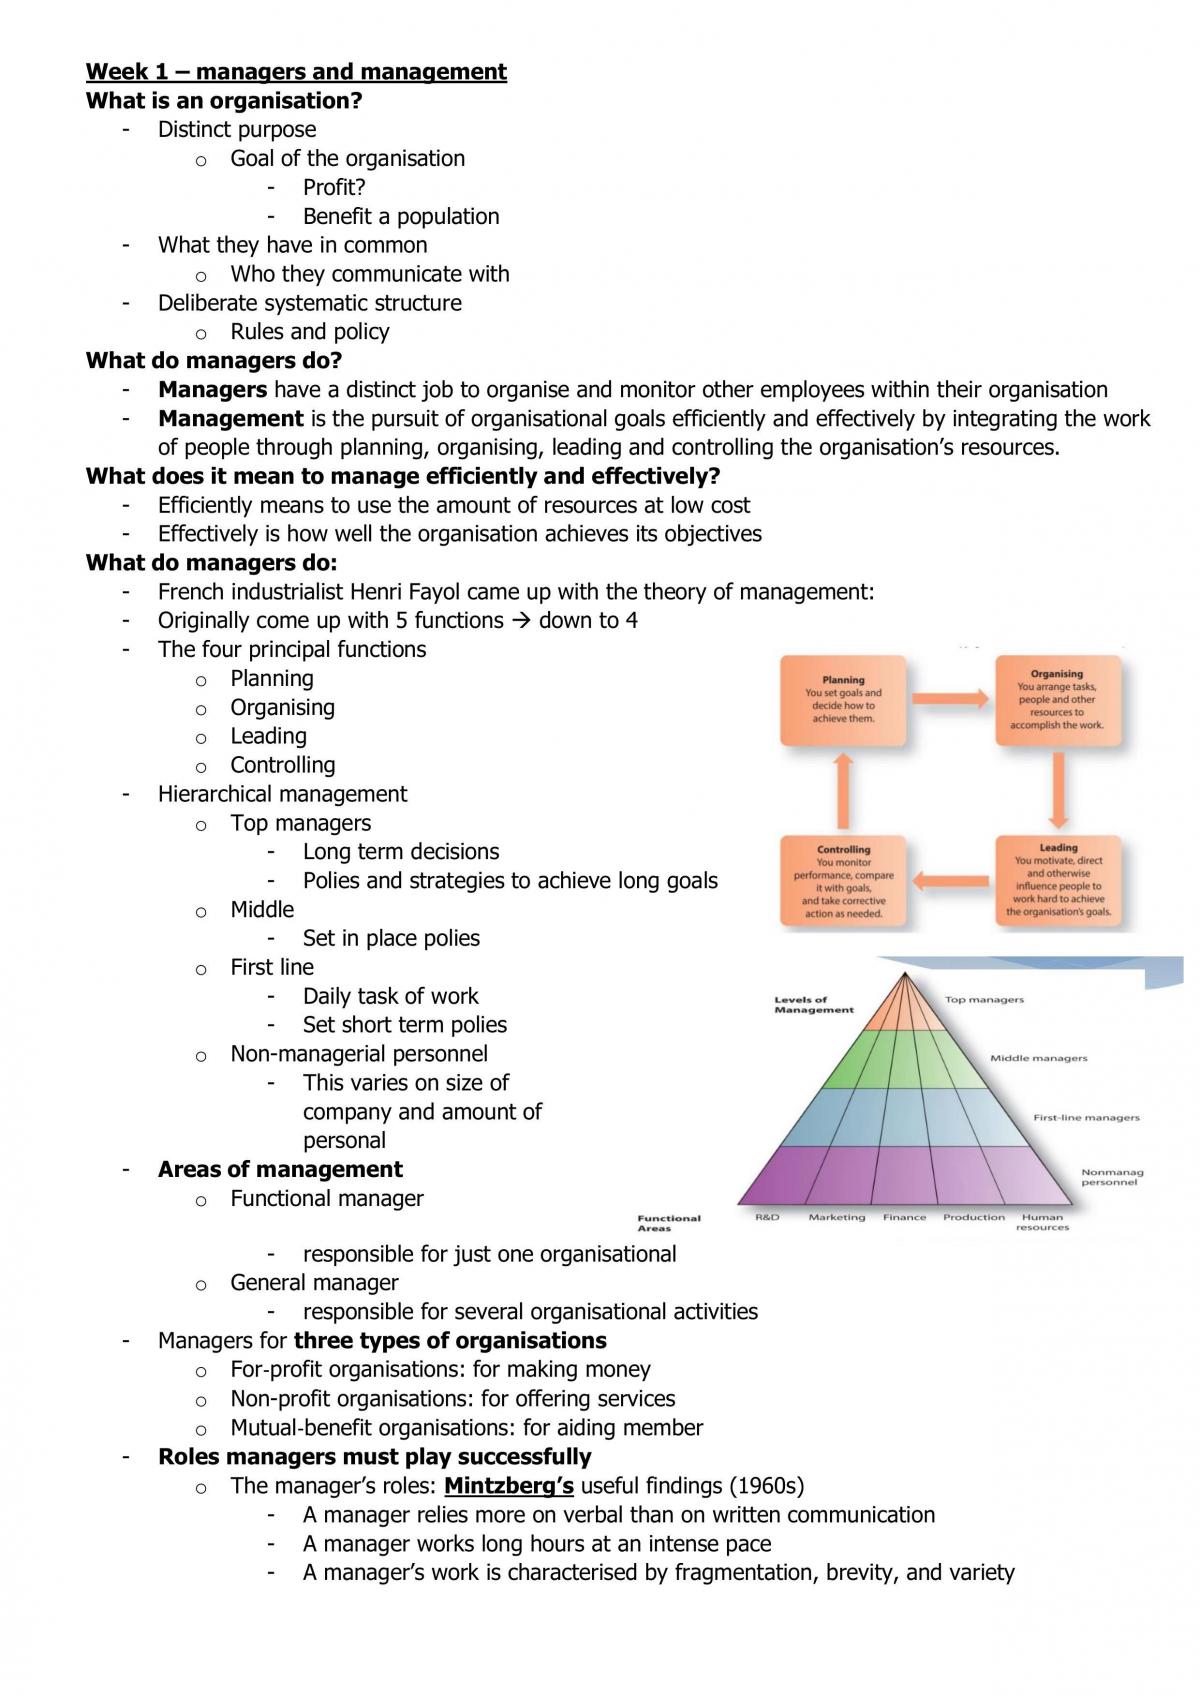 Extensive BBA102 Notes | MGMT1002 - Principles of Management - MQ ...